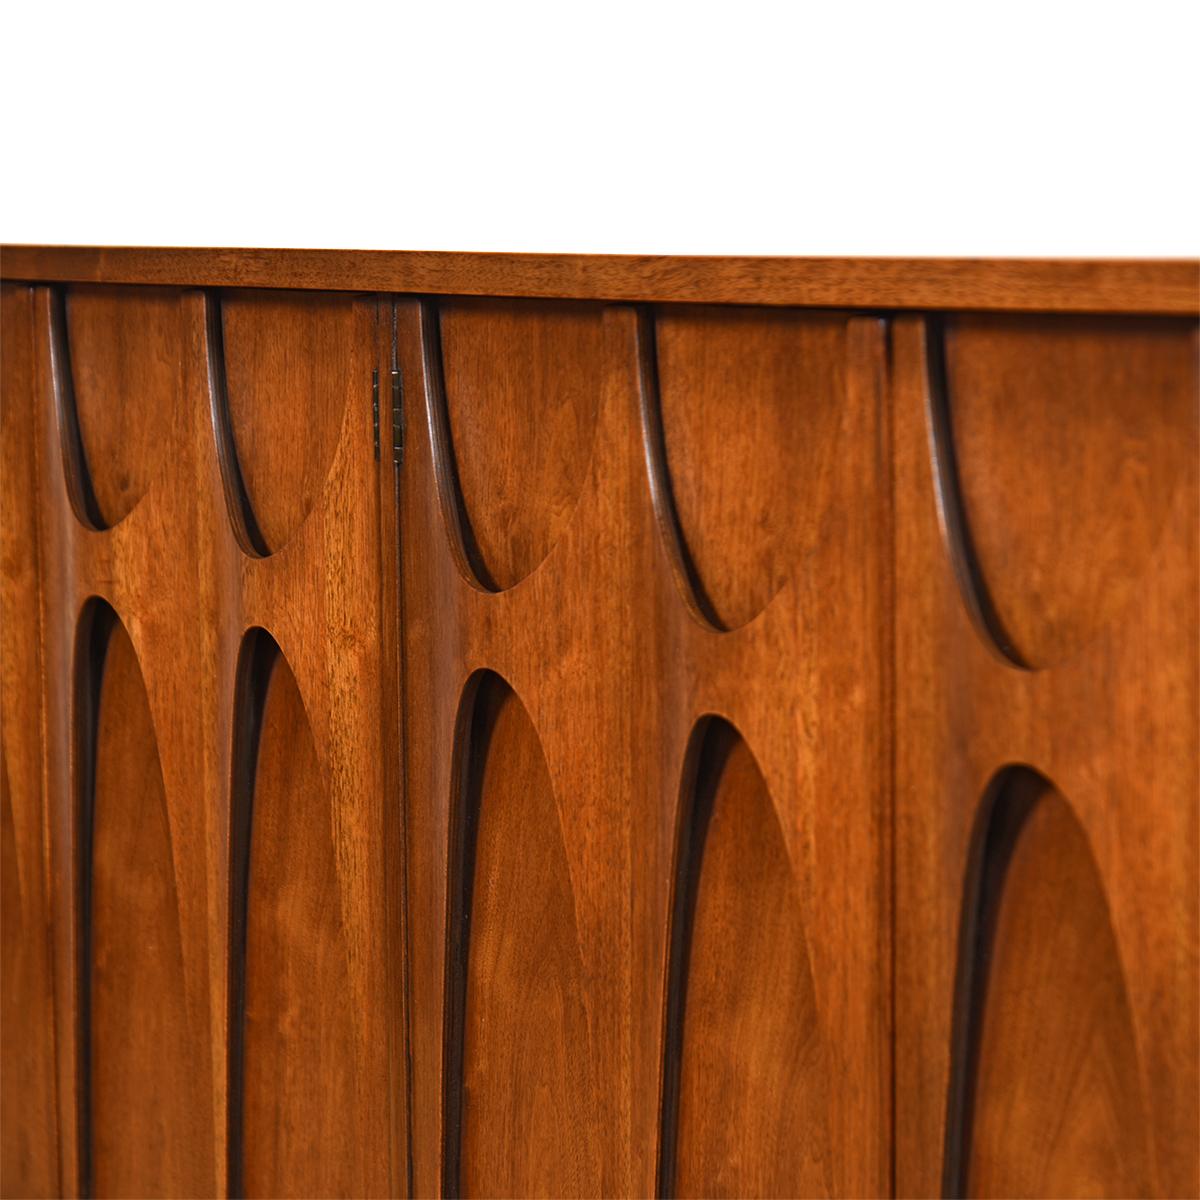 Coveted 4-Door Credenza Buffet in Walnut by Broyhill Brasilia 1